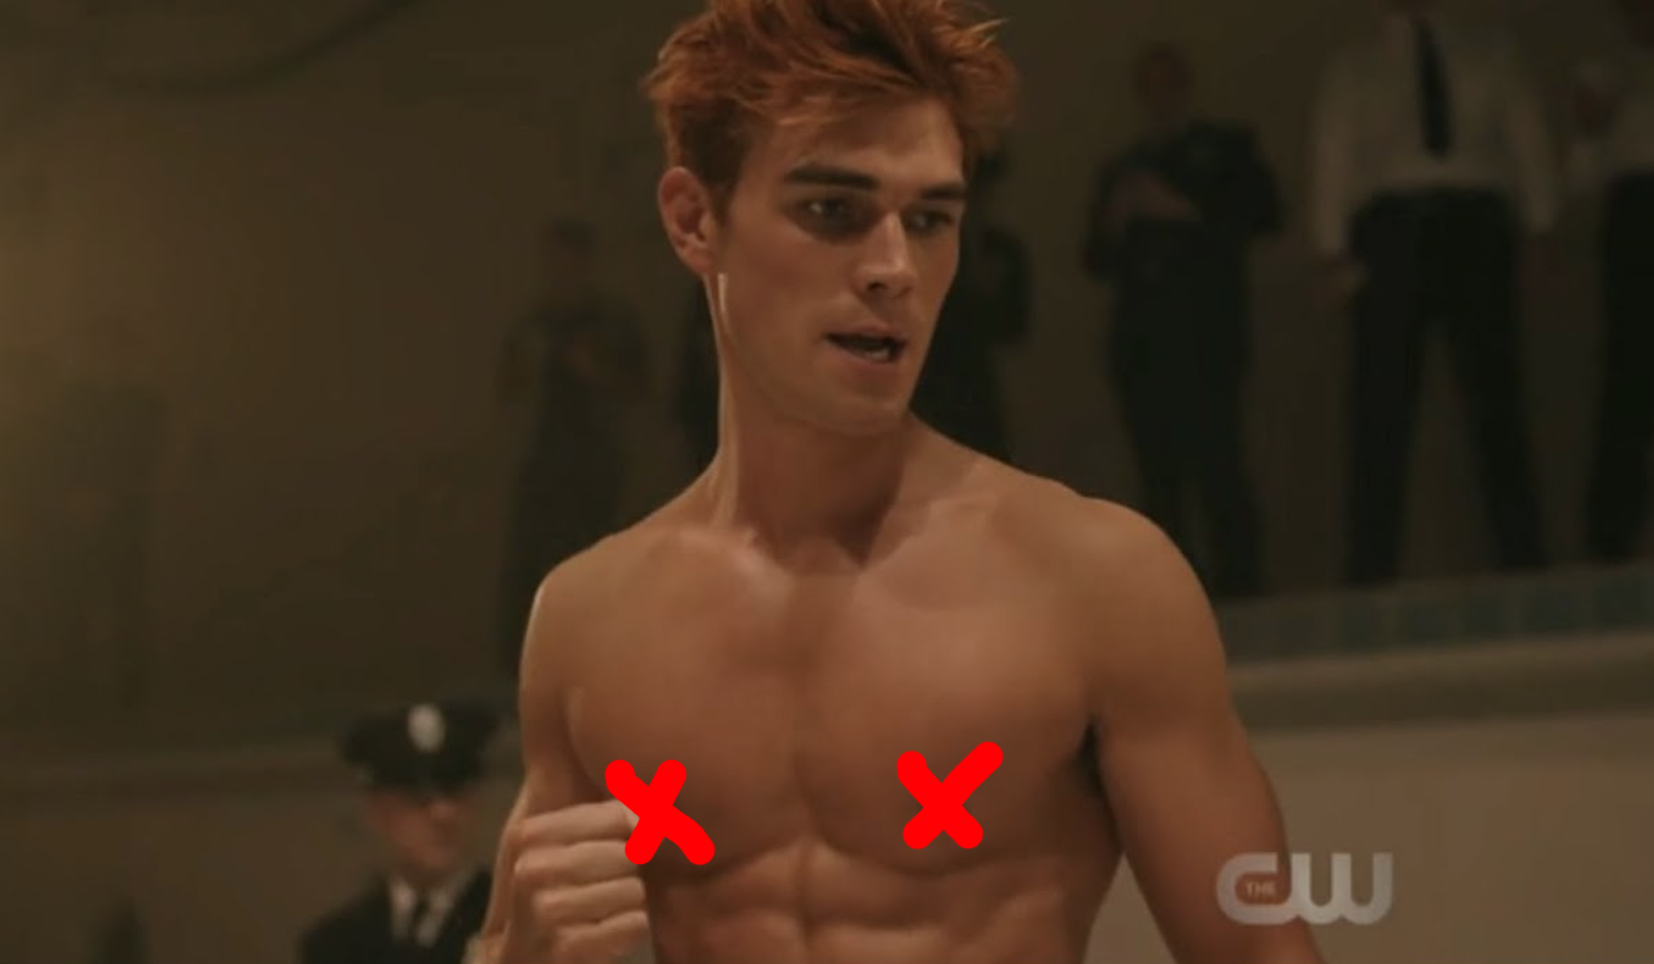 KJ as Archie, shirtless, in &quot;Riverdale&quot;